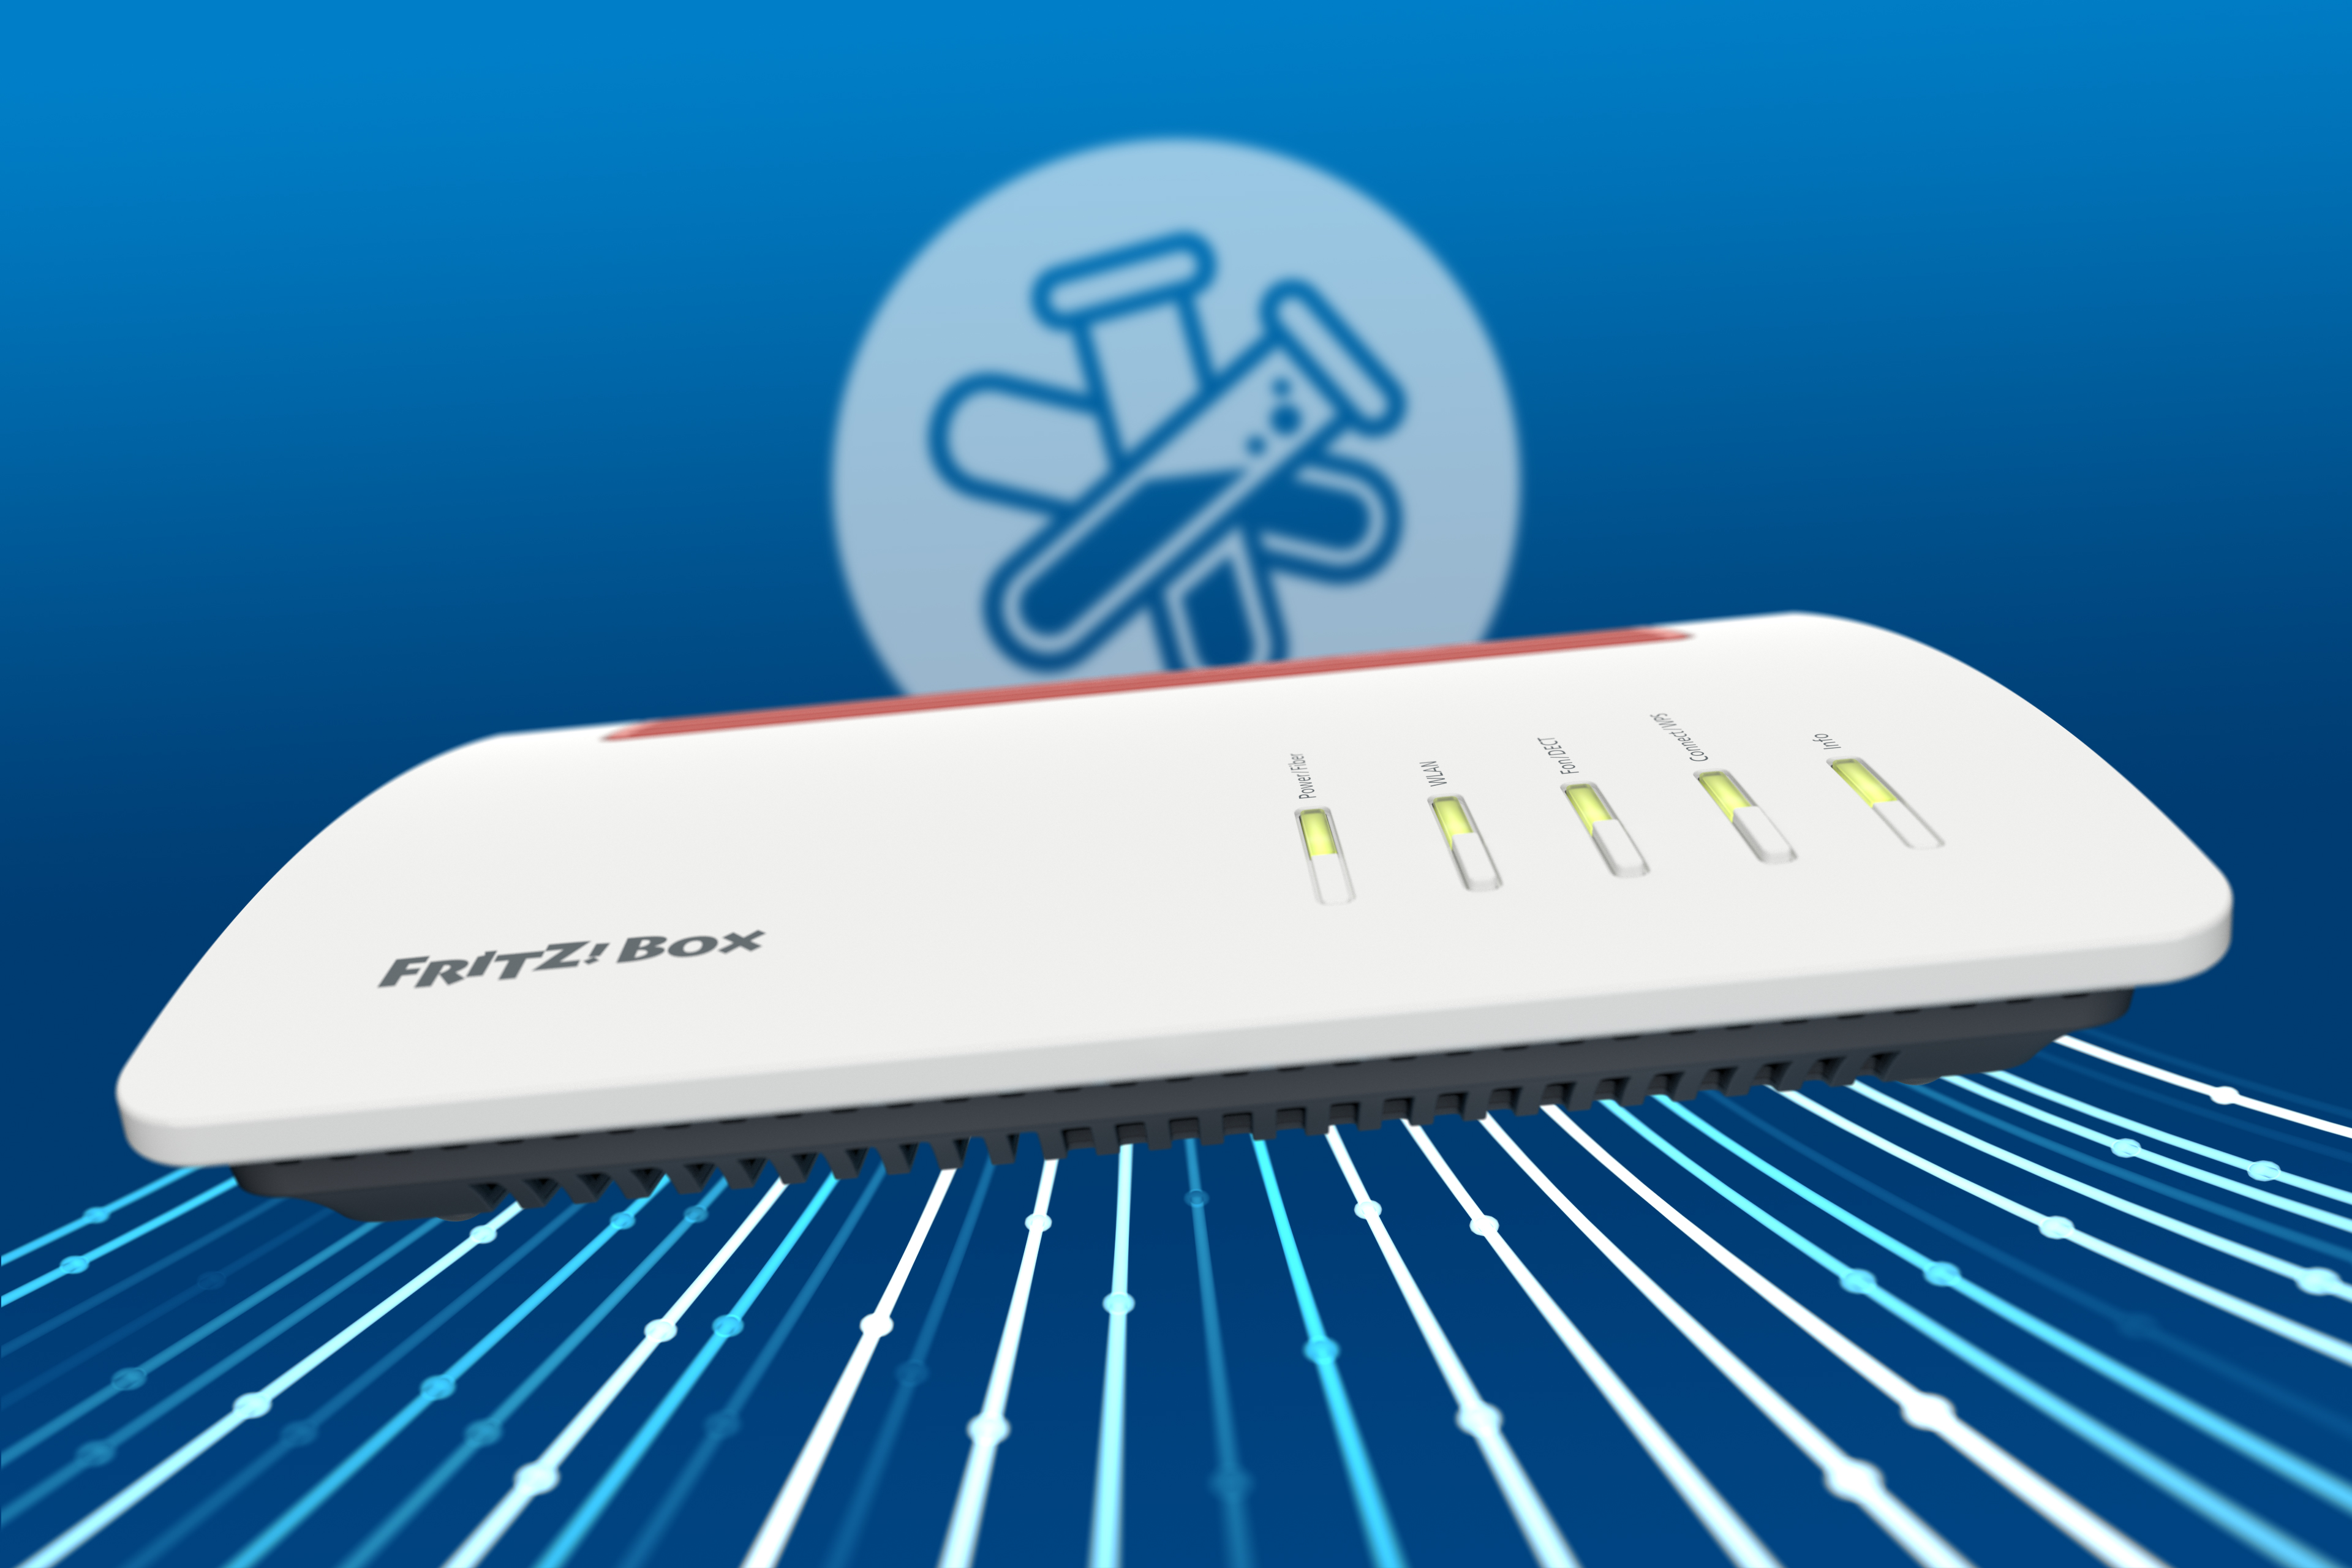 Easier surfing with functions FRITZ!Box | fiber latest the optic AVM the of International